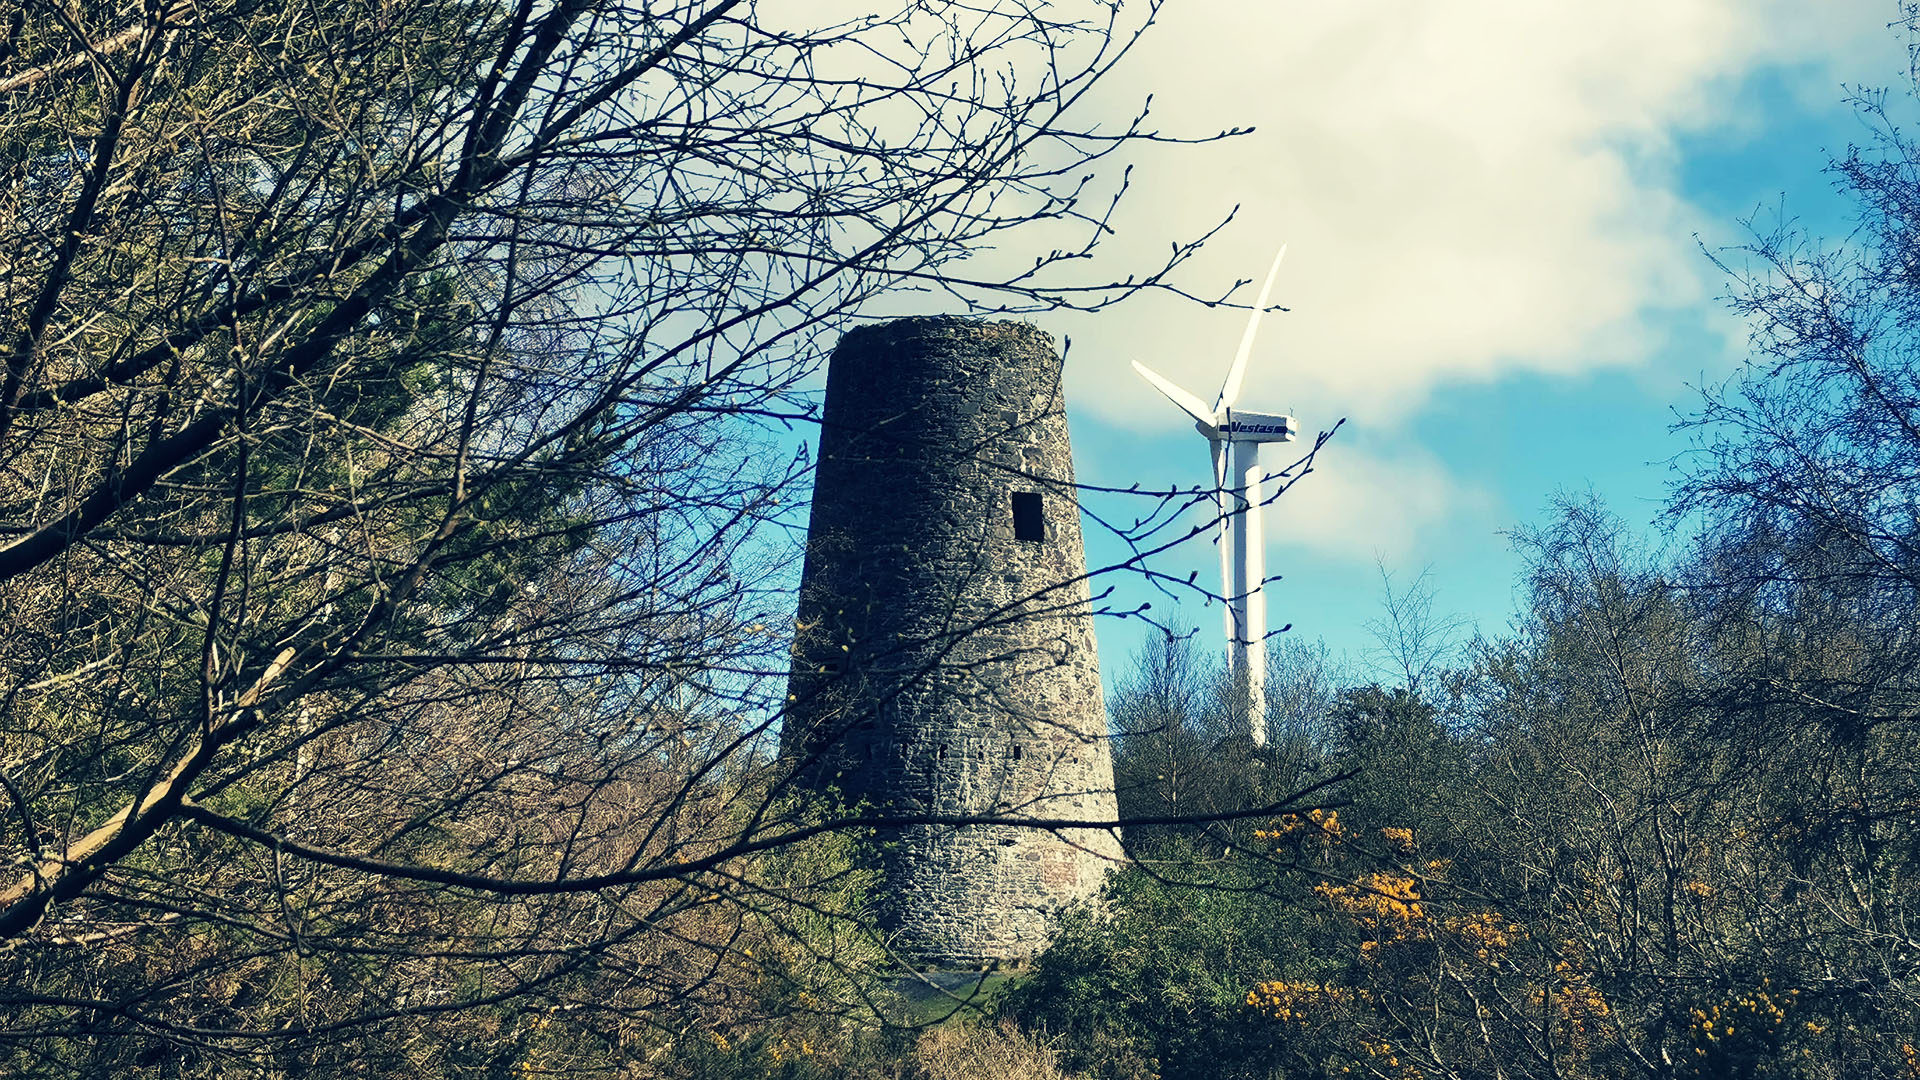 The old windmill at Whitespots Country Park